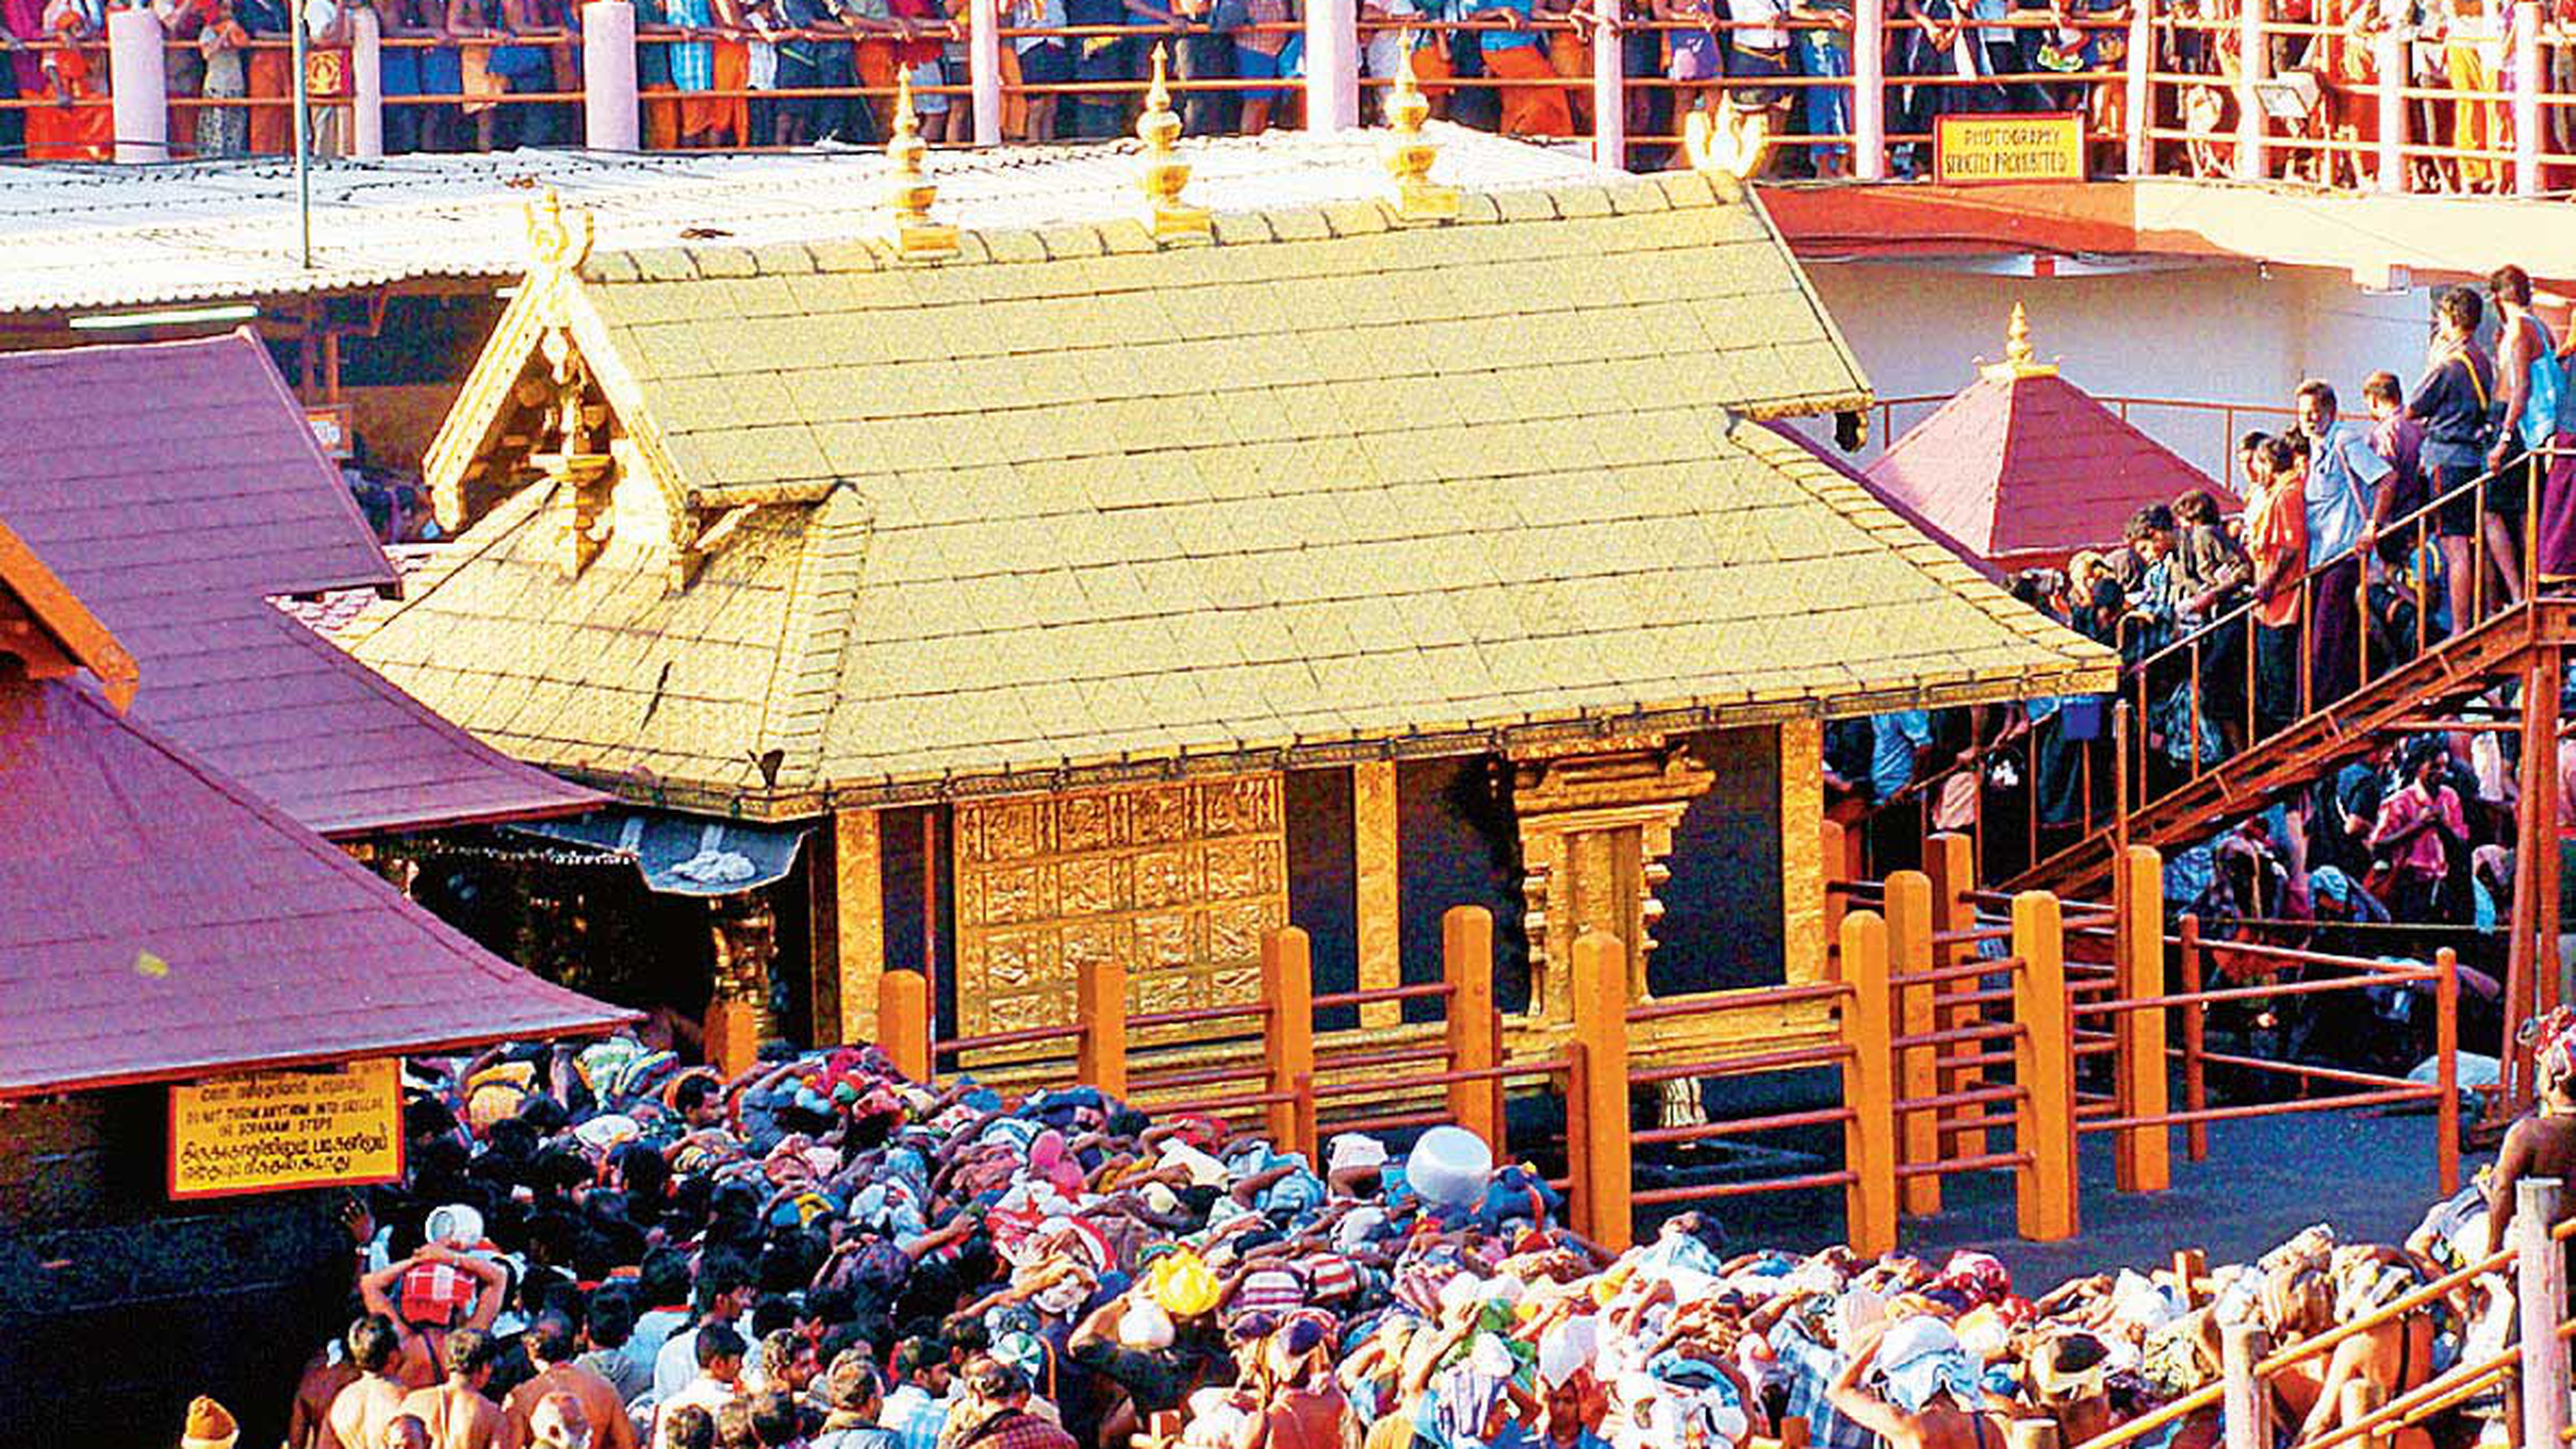 Women who entered Sabarimala appeal for 24x7 security in Supreme Court